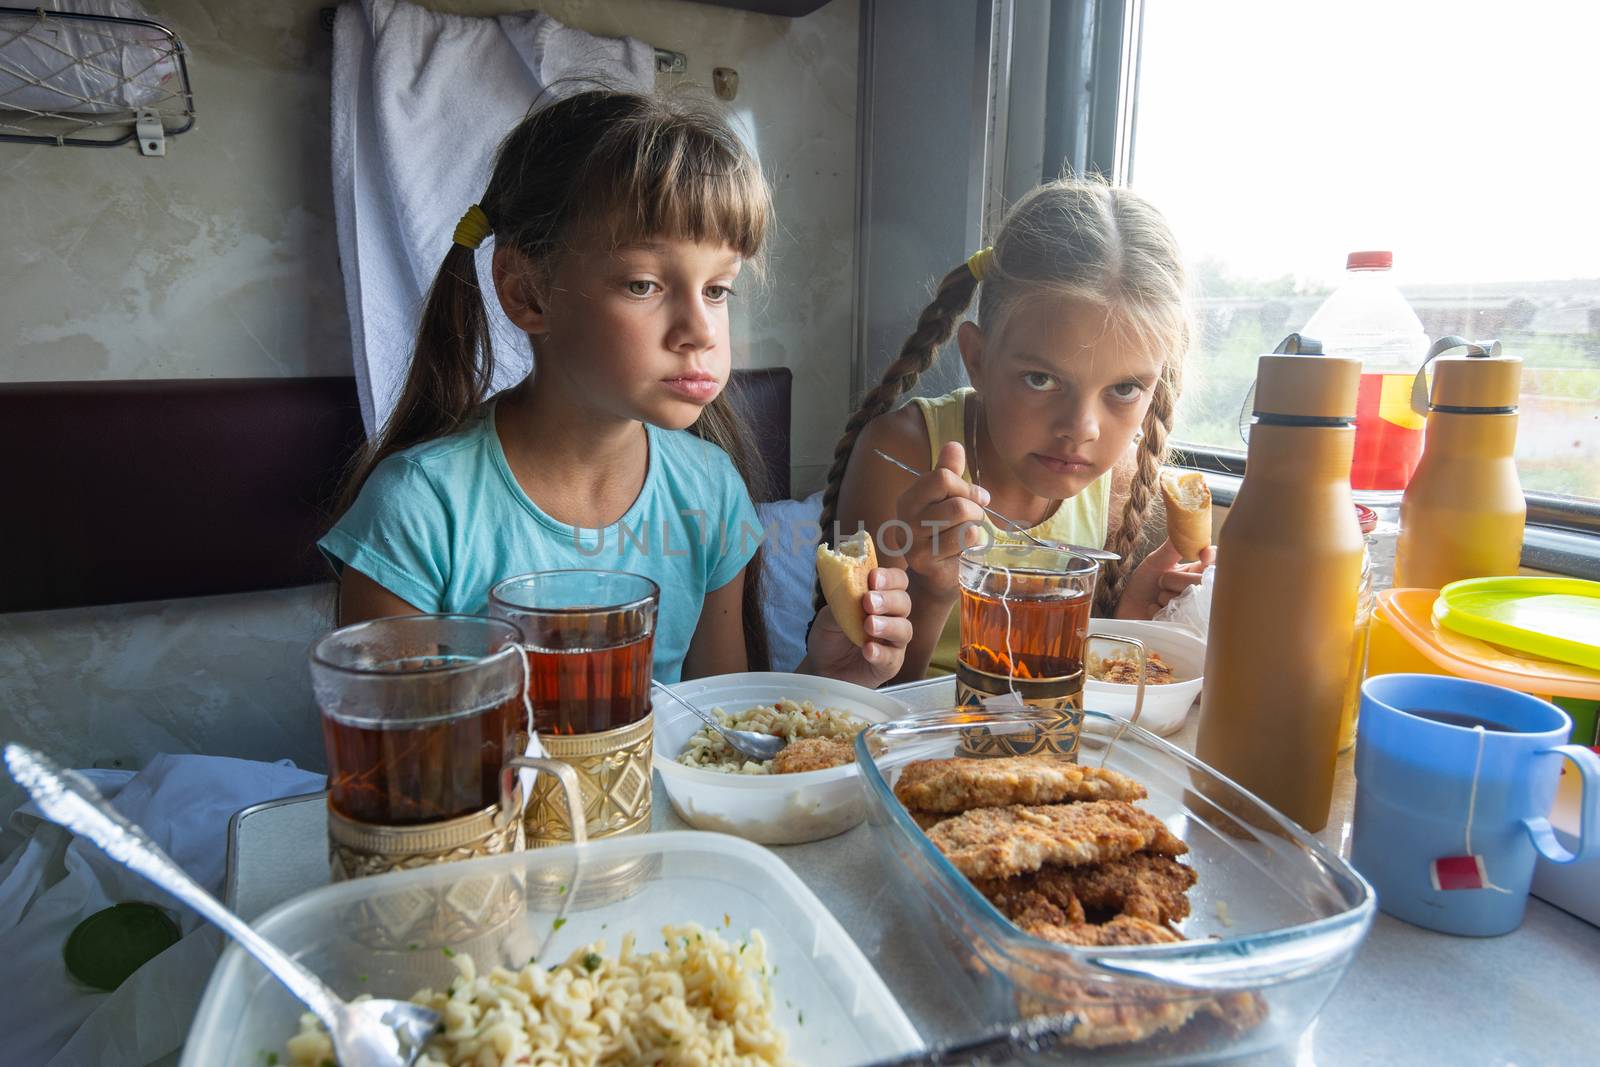 Two girls have lunch in the reserved seat of the train by Madhourse